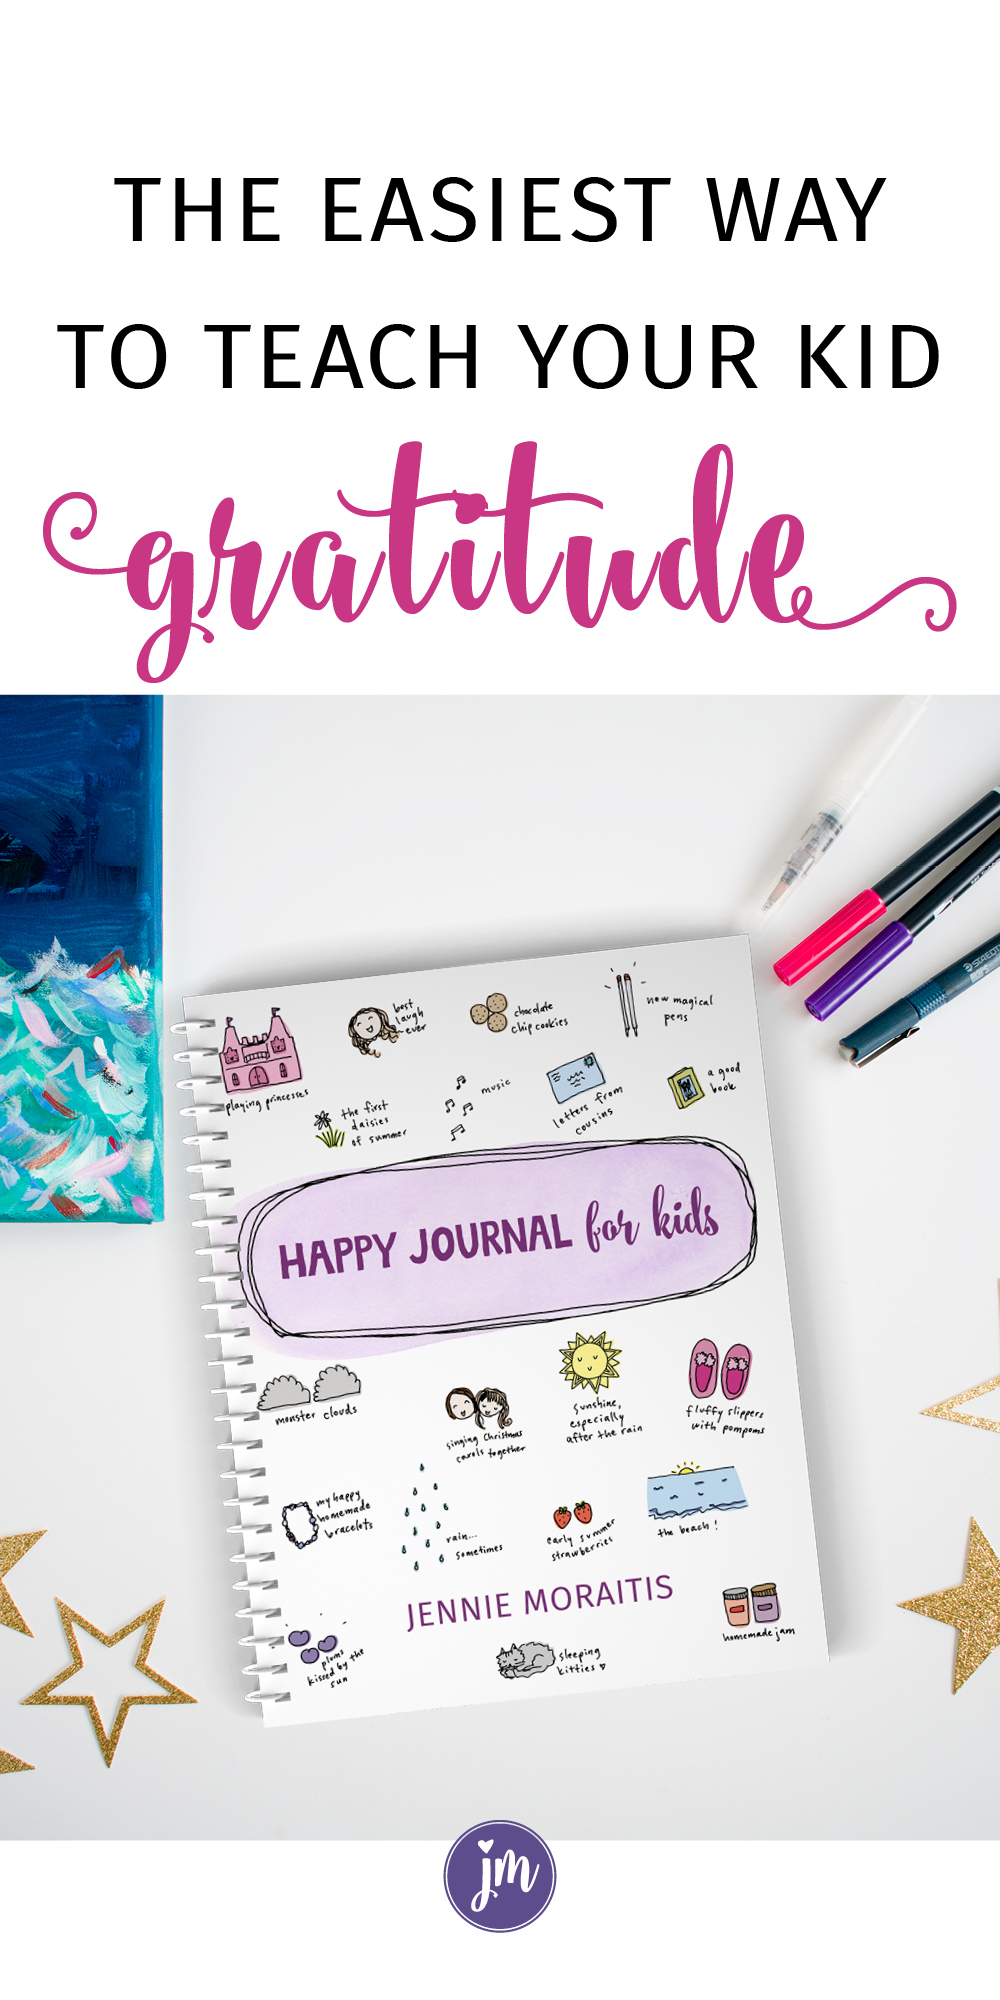 Oh my goodness, I love this gratitude journal for kids! I printed one out and my daughter filled almost the entire thing up the FIRST day! She had so much fun thinking about the things that make her happy, and I was inspired to join in with a happy journal of my own. Perfect for kids of all ages! :) #happyjournalhappylife #gratitudejournal #gratitudejournalforkids